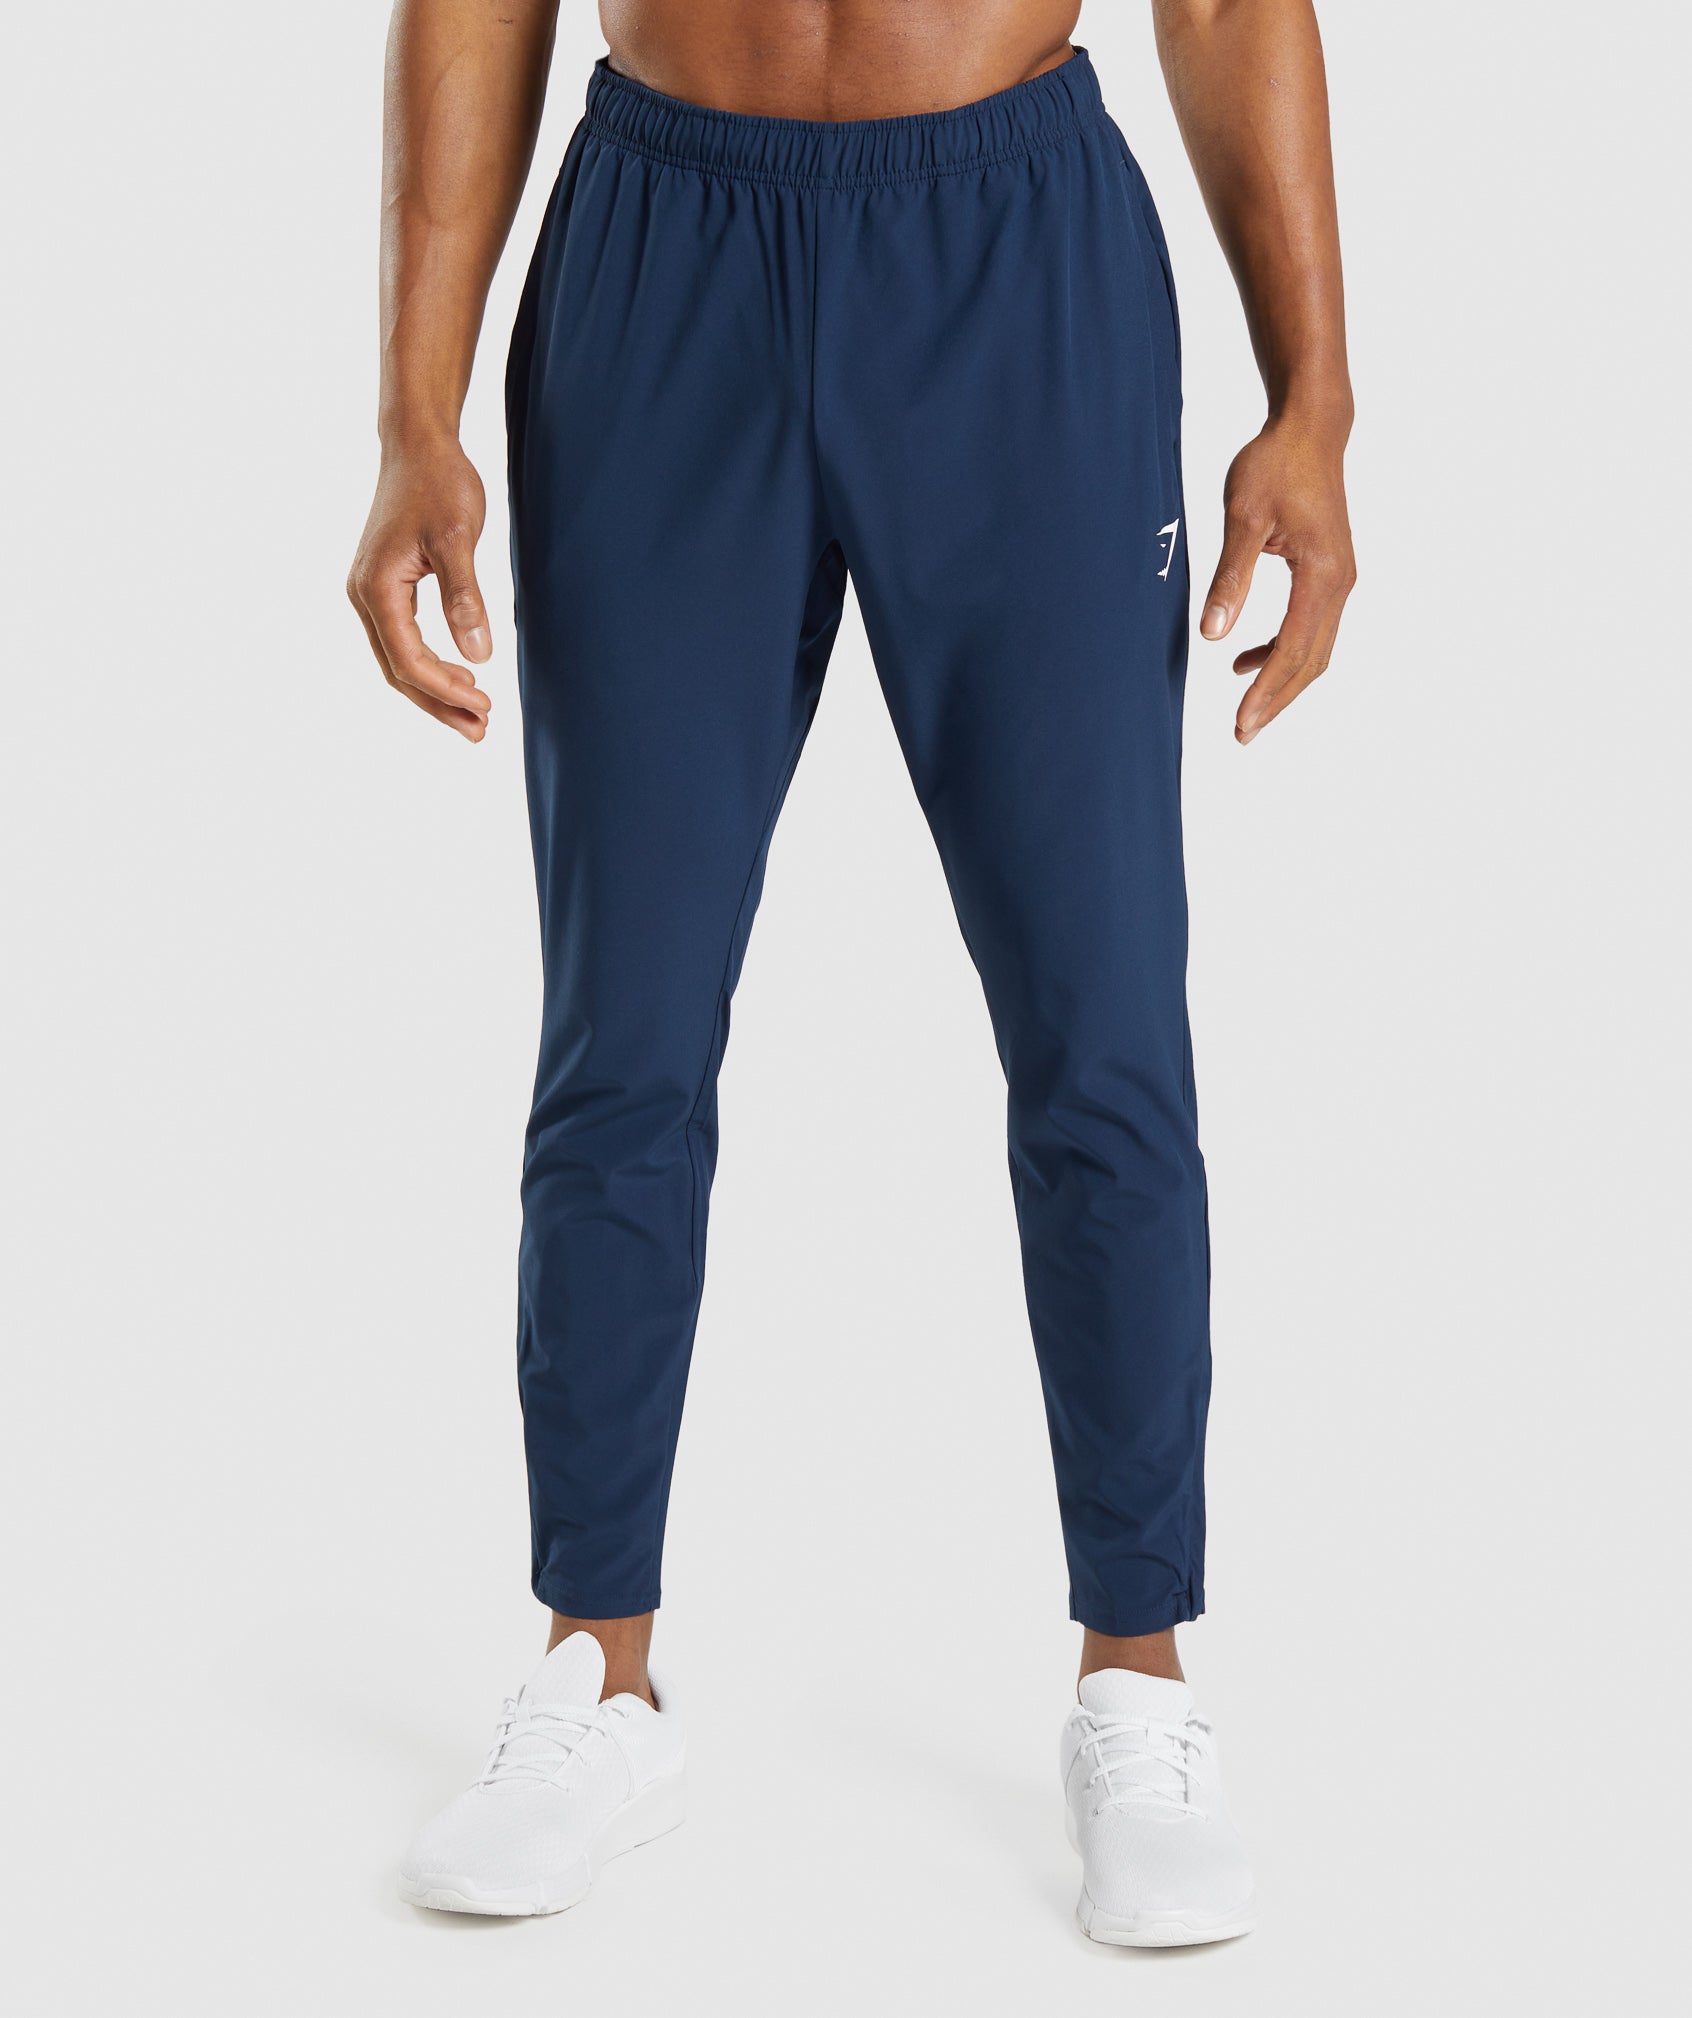 Arrival Woven Joggers in Navy - view 1